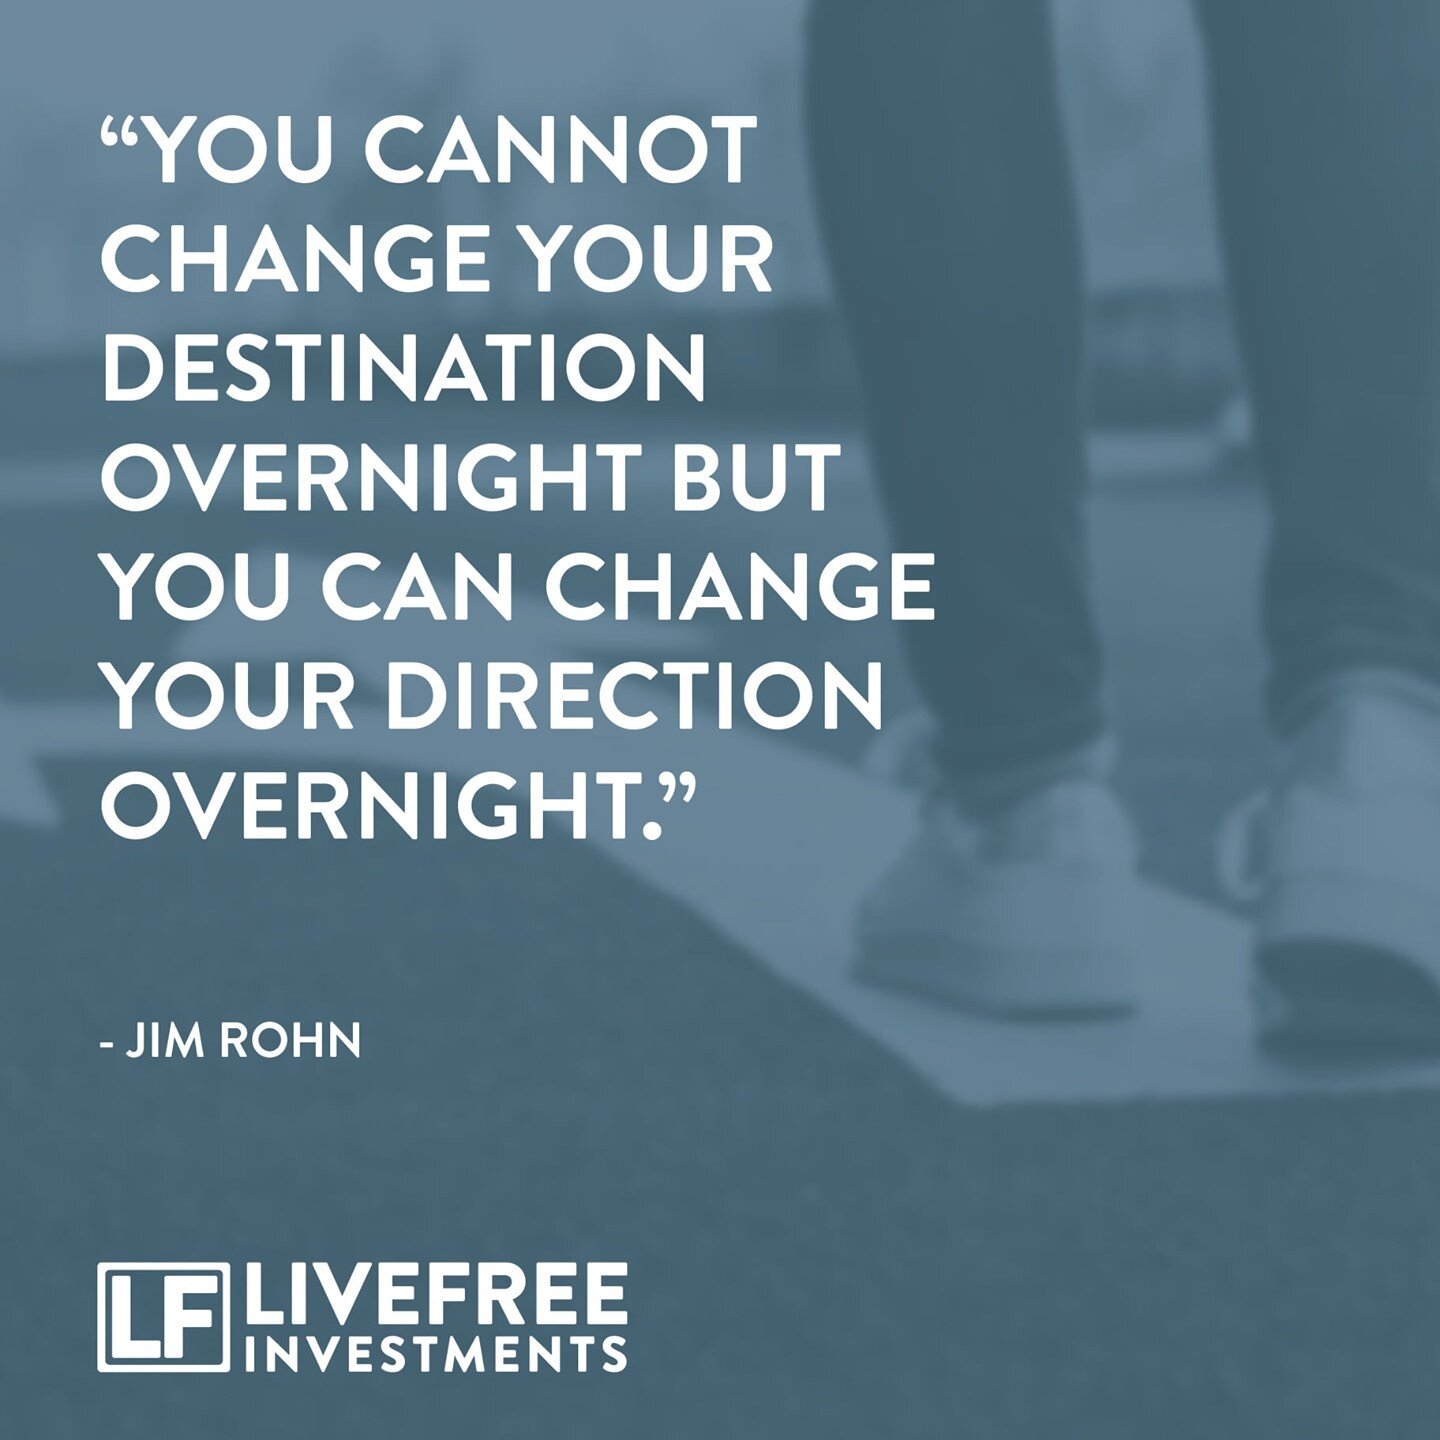 #SaturdaySuccessQuote 💪 What direction are you heading in? ⬆️➡️⬇️⬅️

Does it need a course correction? Make an assessment today and make next week a success!

#livefree #livefreeinvestments #realestate #investing #success #kc #kcmo #kansascity